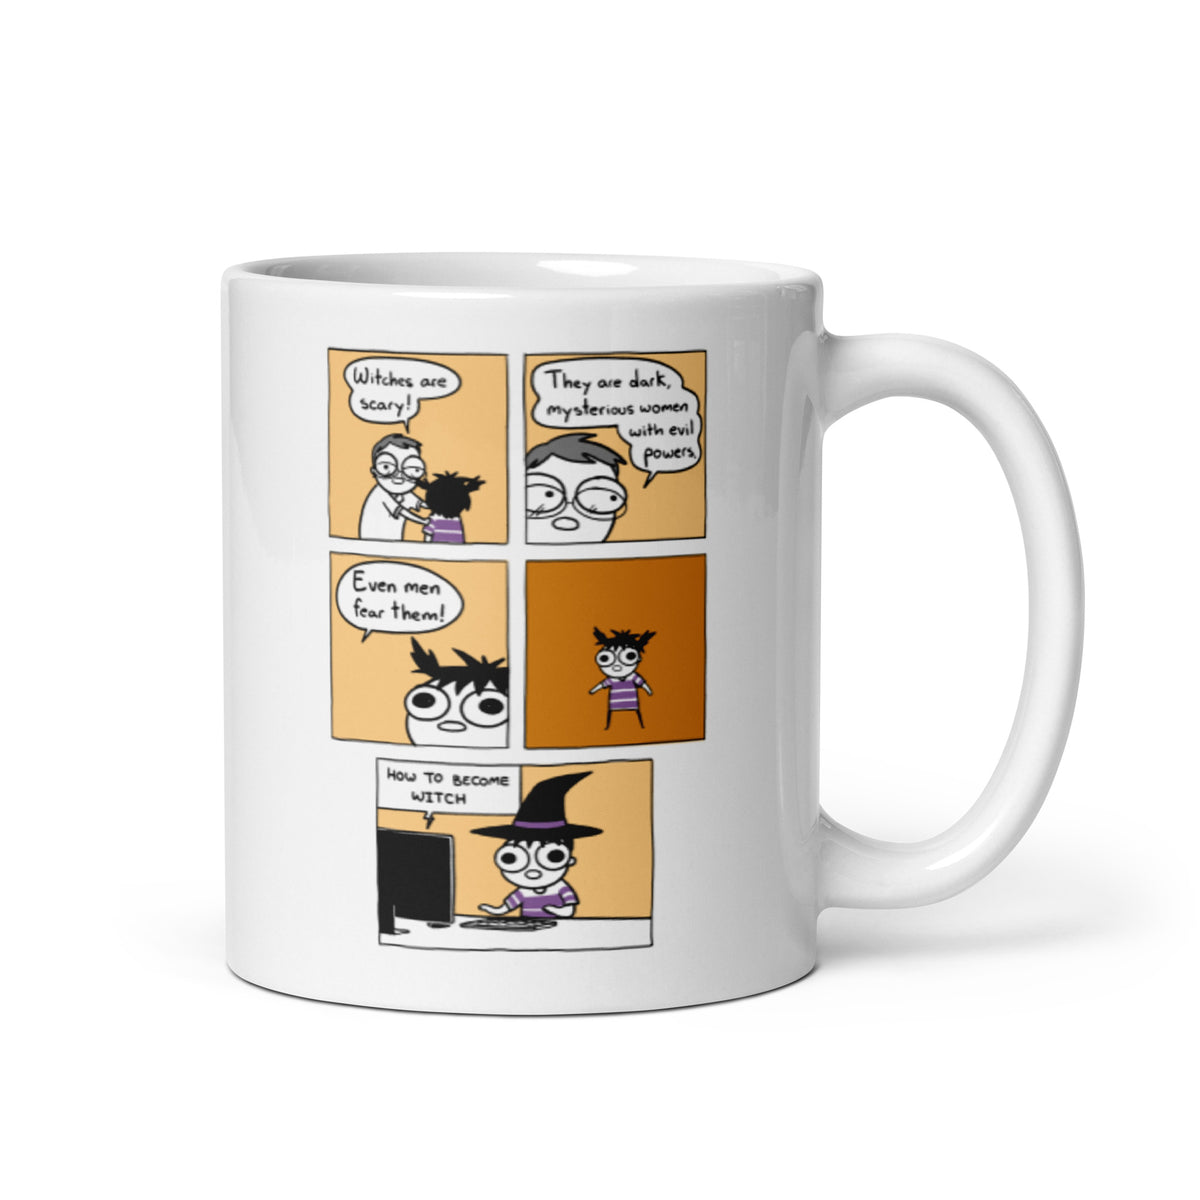 Witches are Scary White Glossy Mug